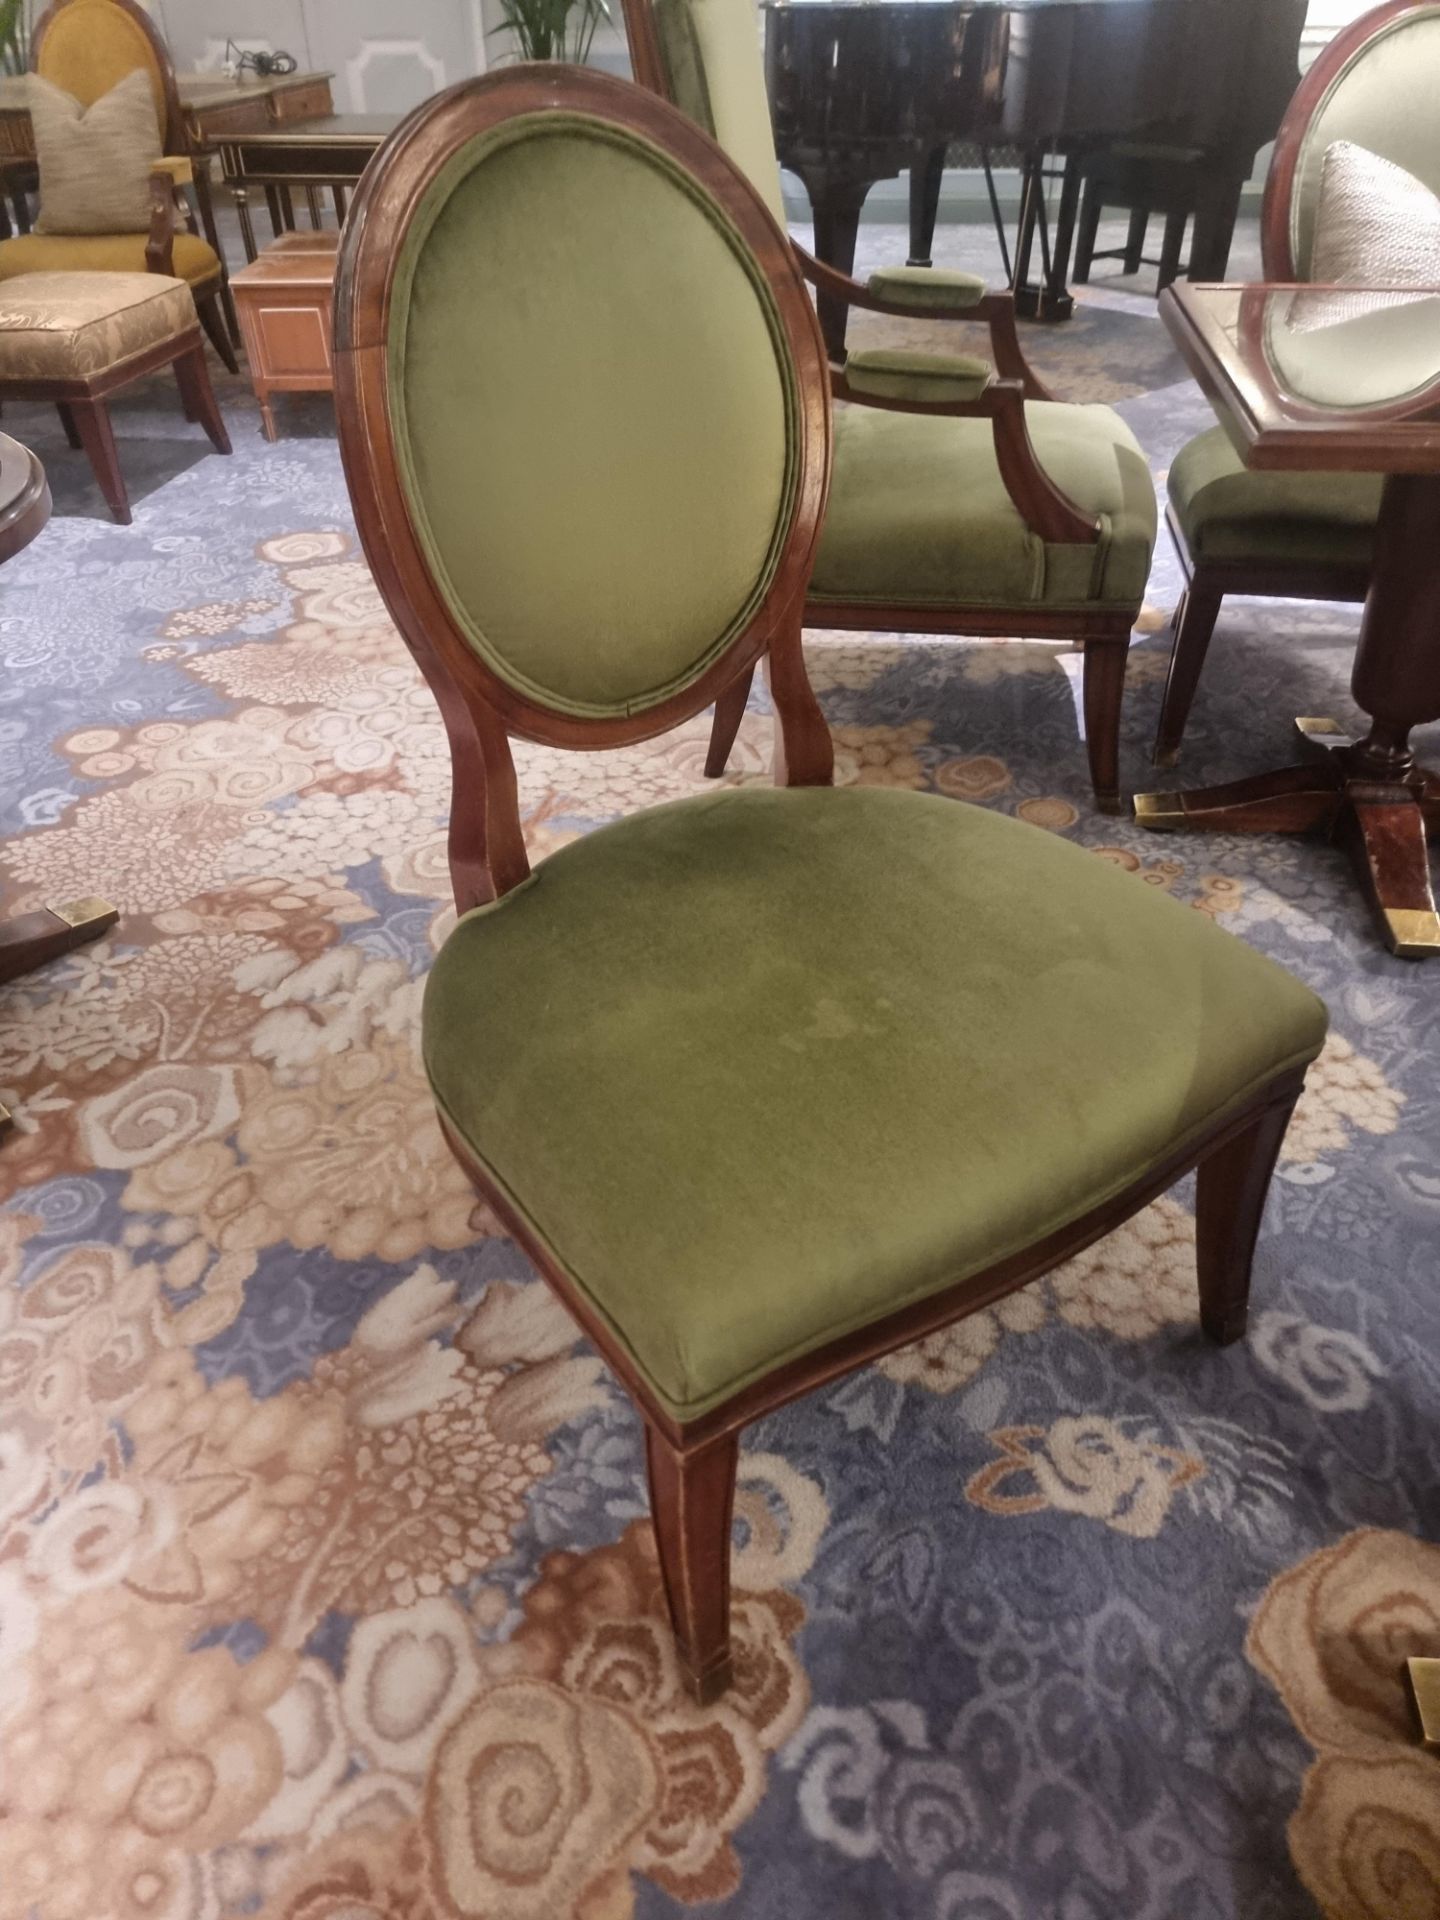 Louis XVI Style Framed And Upholstered Chair In Lelievre Paris Olive Green Salon Chair 68 x 68 x